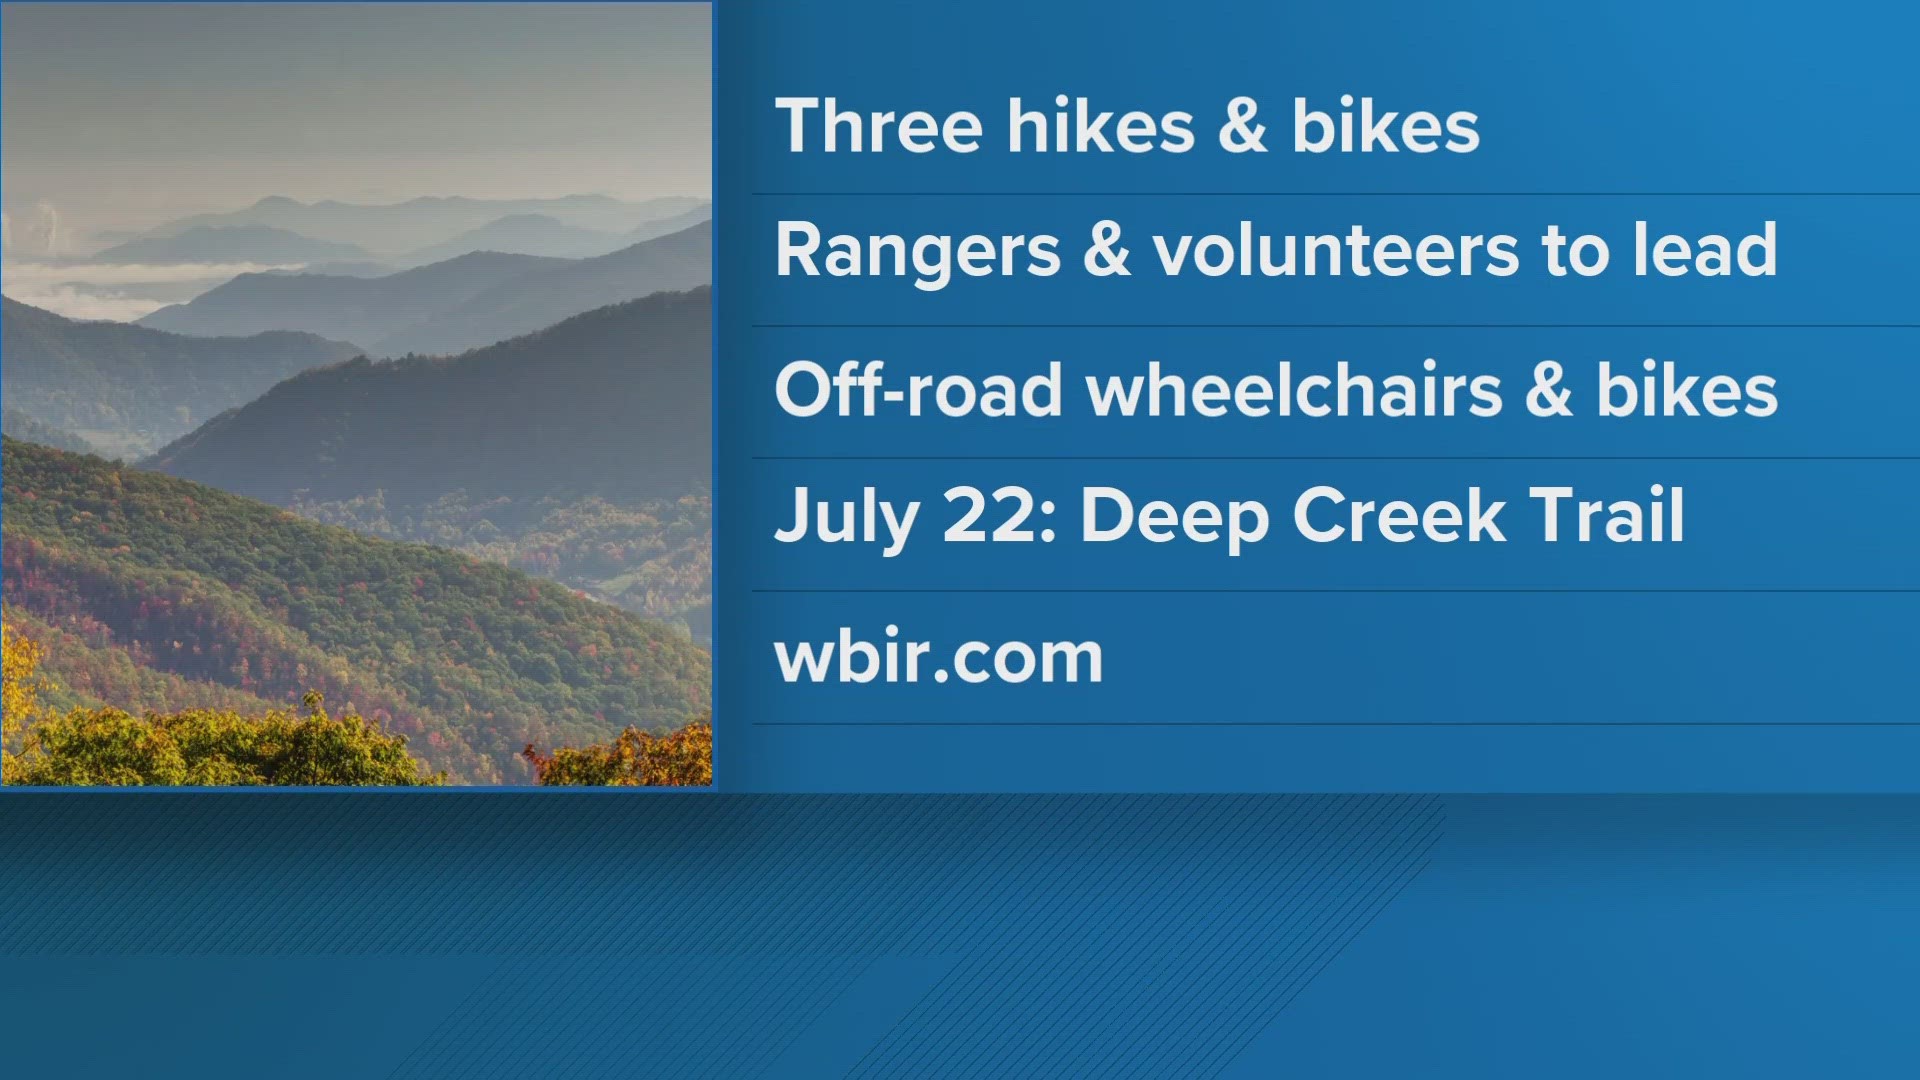 This summer the Great Smoky Mountain National Park said it is offering three Adaptive Adventures programs to make the park more accessible.